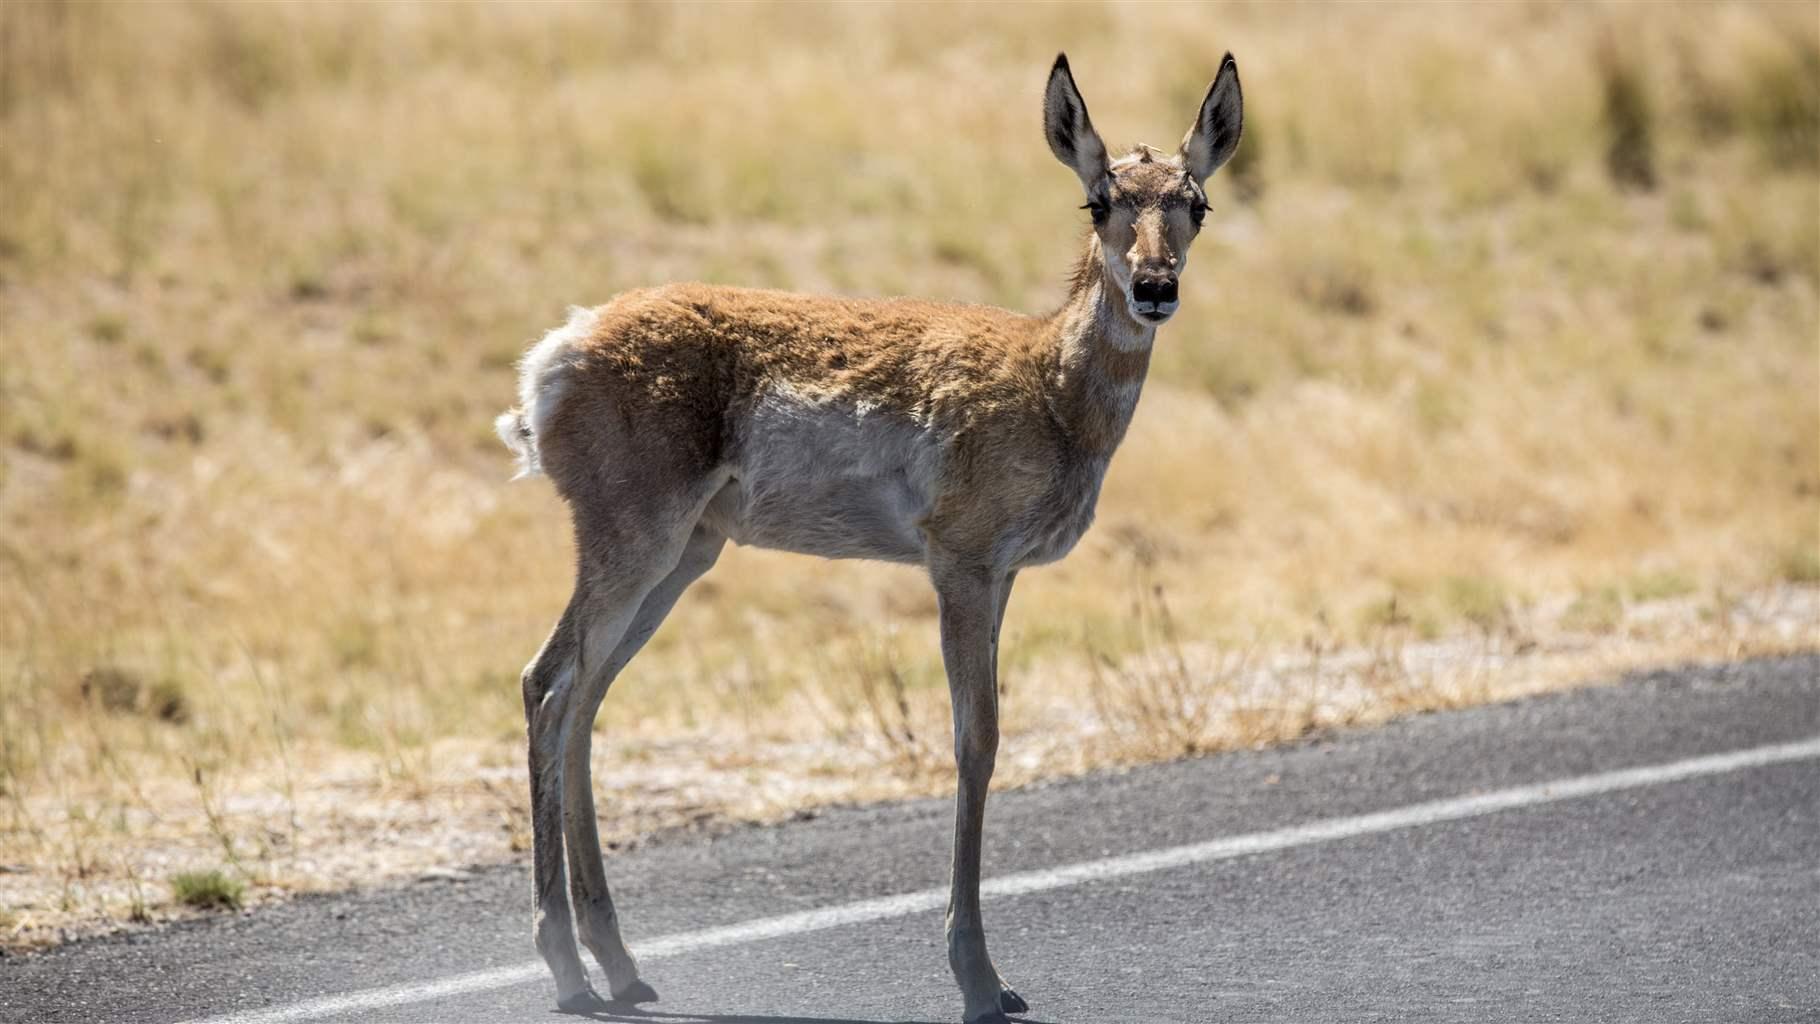 A pronghorn stands on a road, looking directly toward the photographer. Yellow prairie grasses extend behind the pronghorn and road.